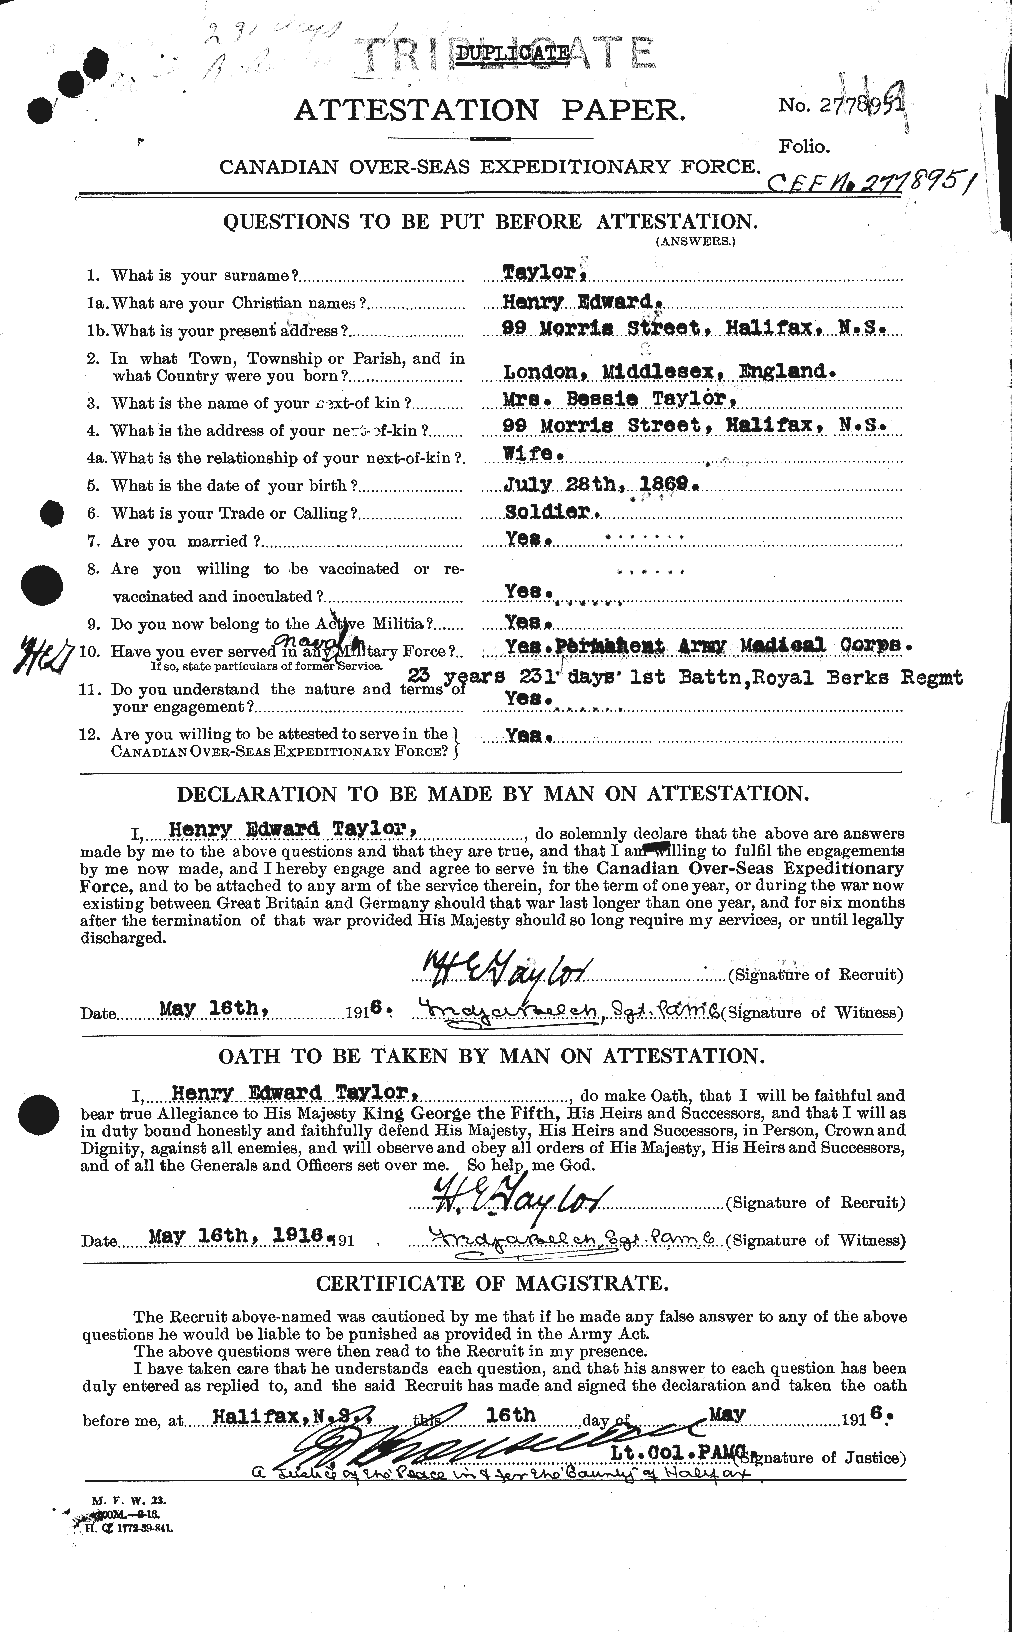 Personnel Records of the First World War - CEF 626535a